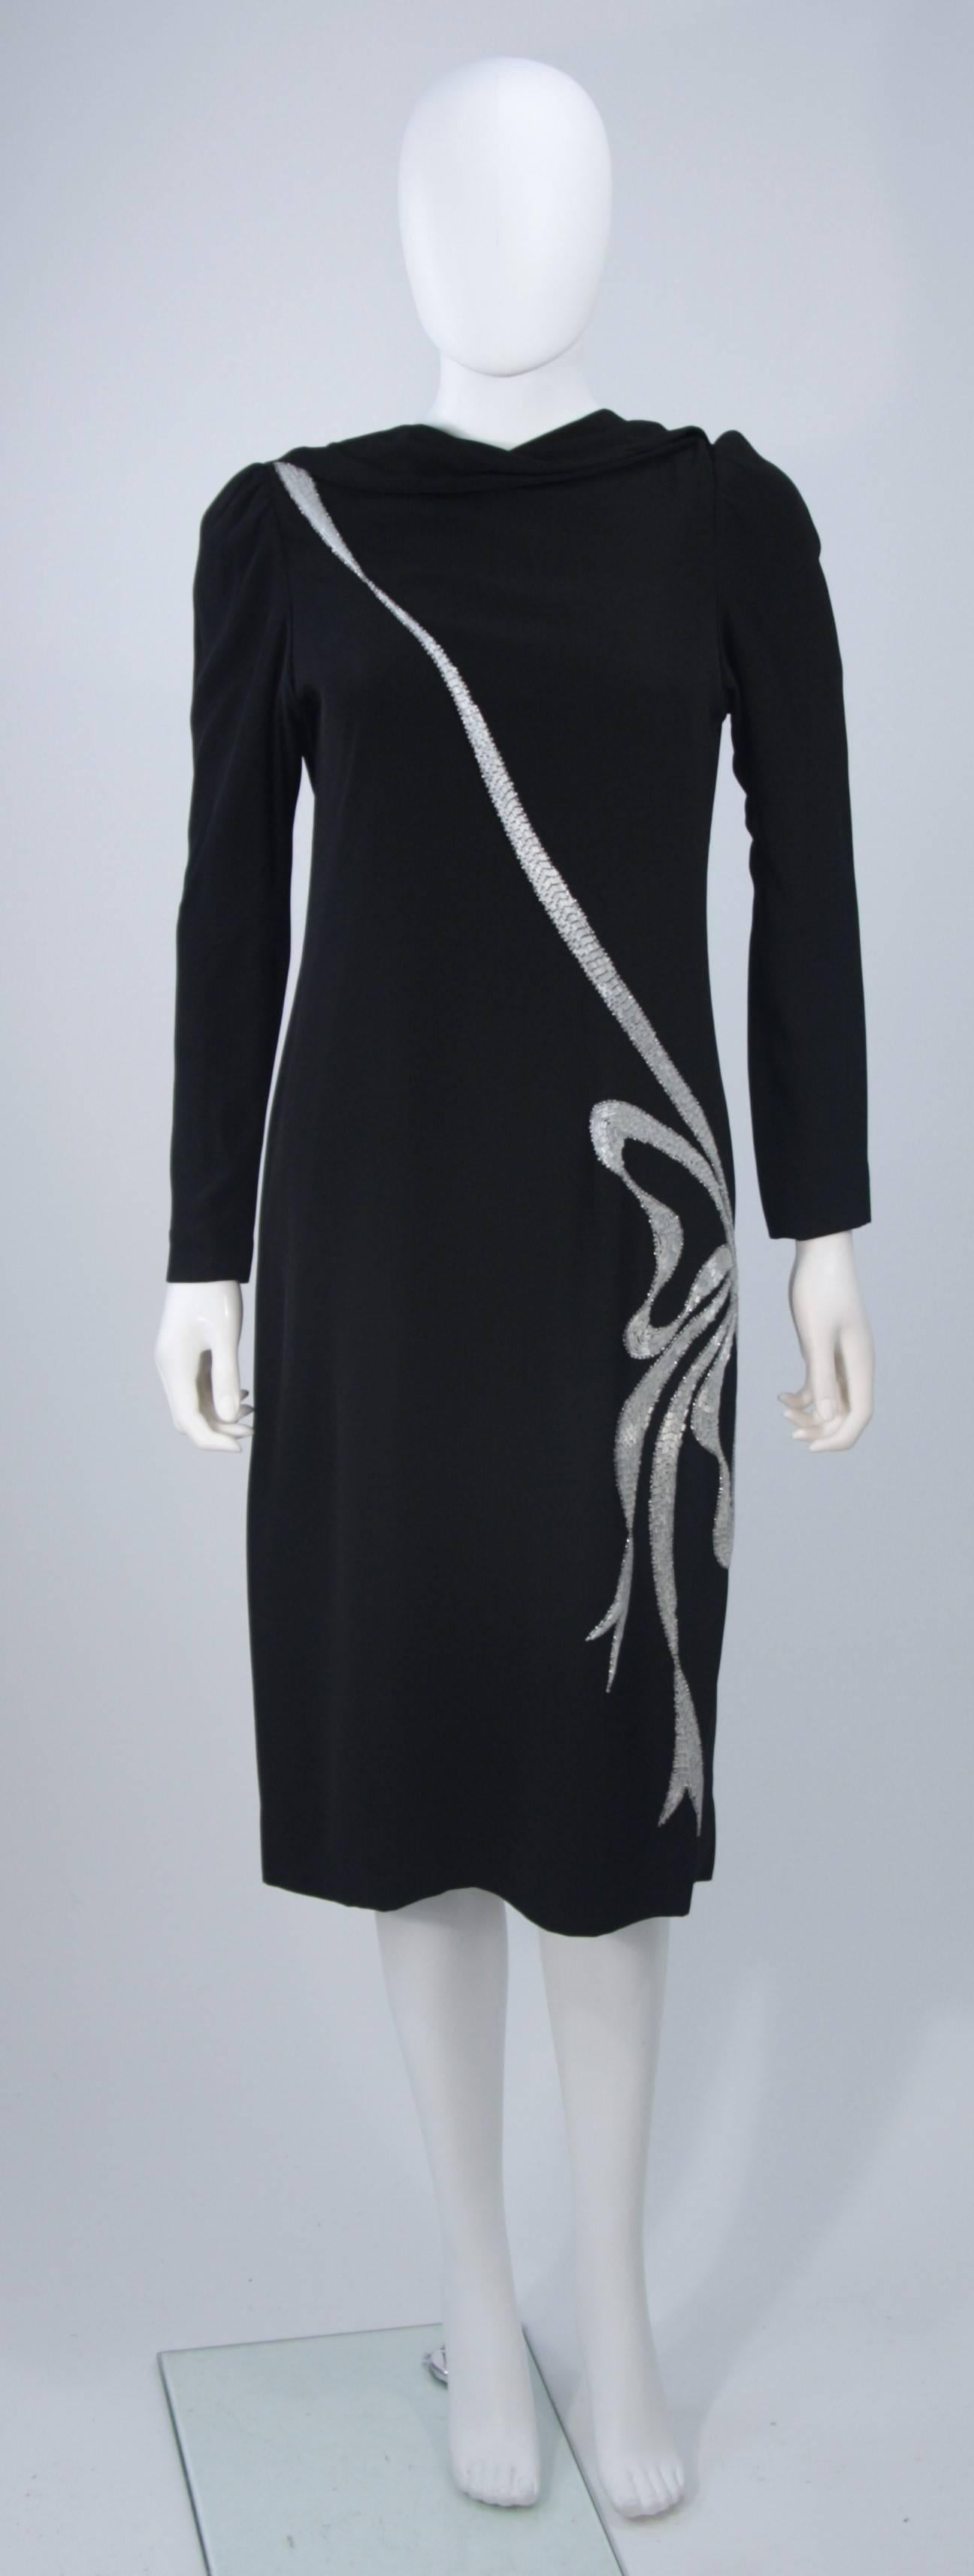  This Bob Mackie cocktail dress is composed of a black silk and features a beaded bow applique. There is an open back design with draping from the neck. Center back zipper closure. In excellent vintage condition. 

**Please cross-reference